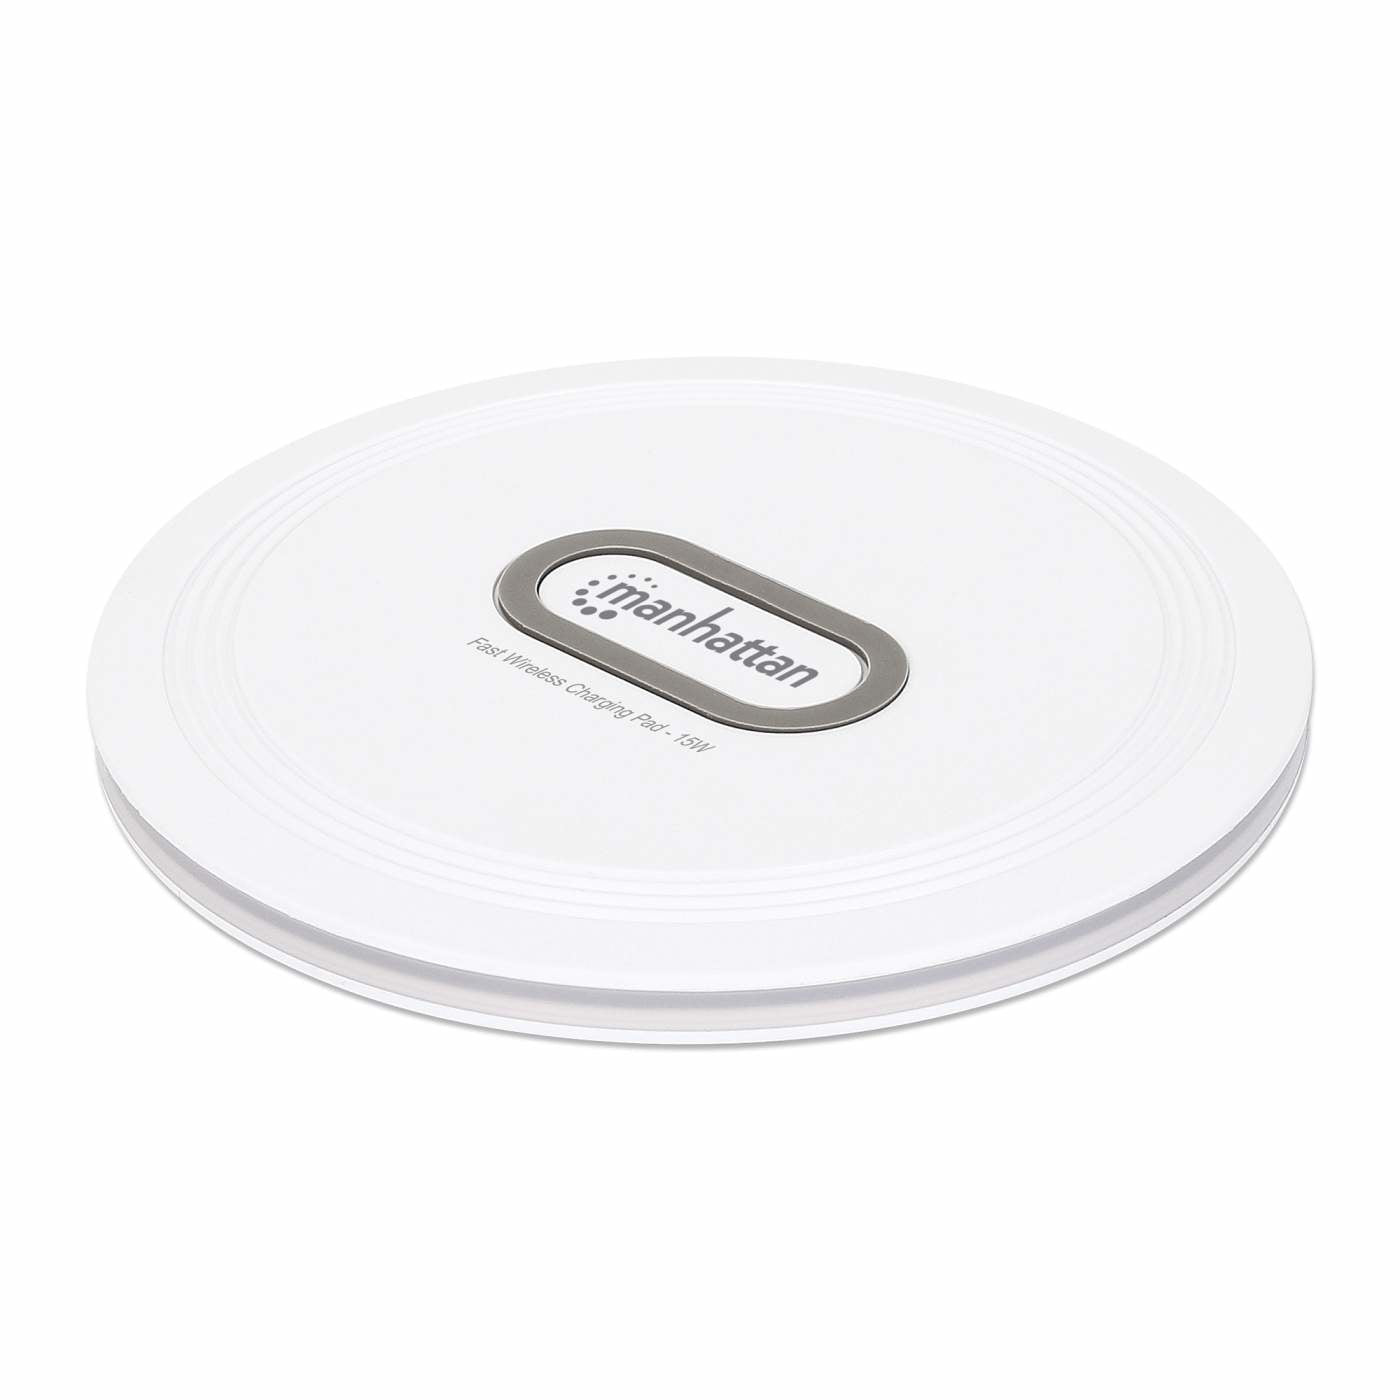 Manhattan Smartphone Wireless Charging Pad, Up to 15W charging (depends on device), QI certified, USB-C to USB-A cable included, USB-C input into pad, Cable 80cm, White, Three Year Warranty, Boxed